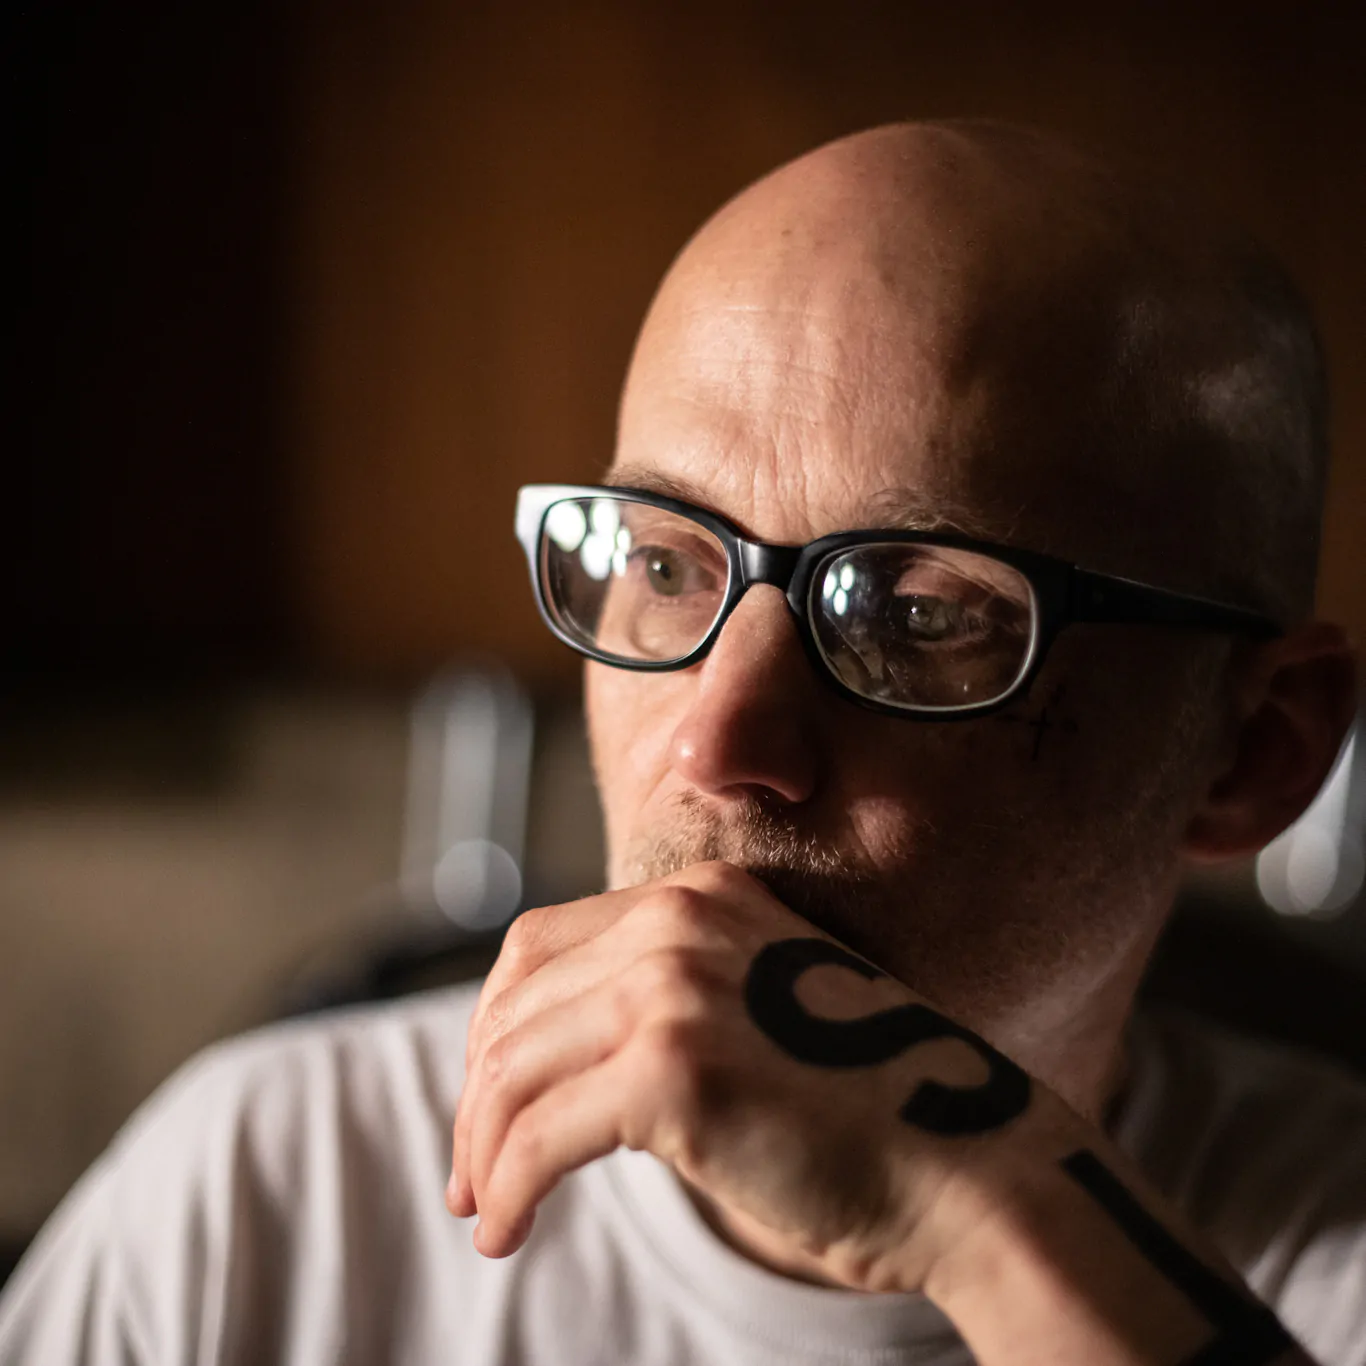 MOBY starts the new year with ‘Ambient 23’ – a new album of ambient compositions